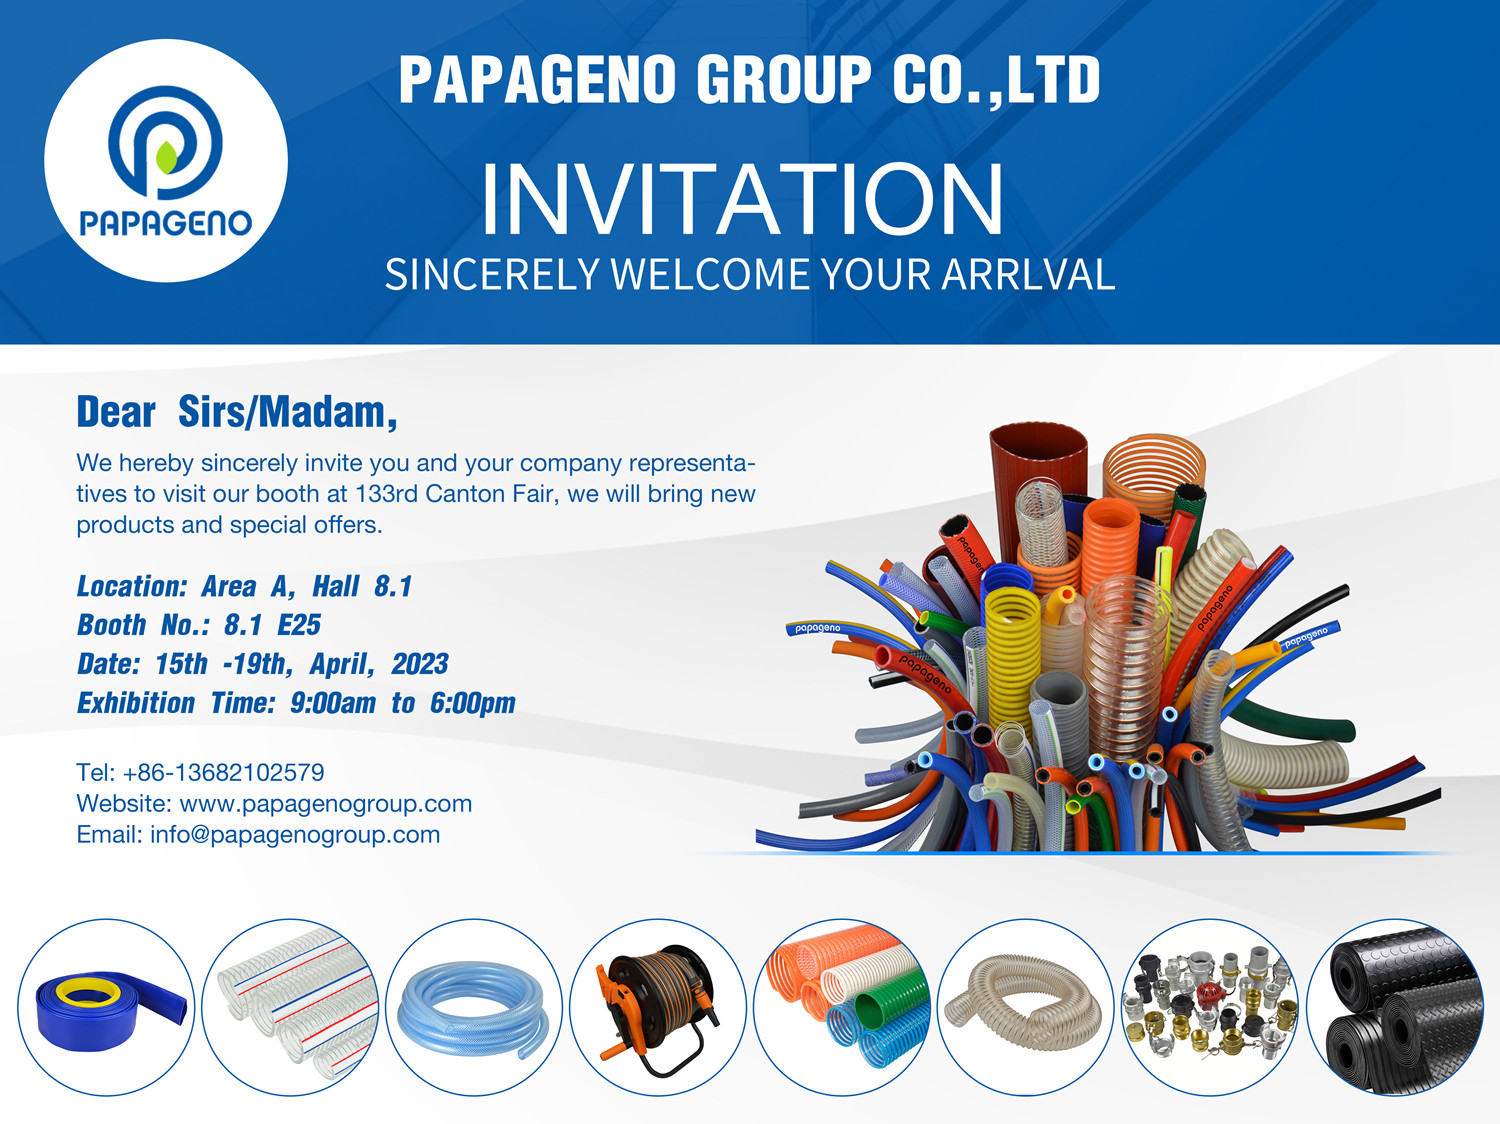 PAPAGENO GROUP TO PARTICIPATE IN 133RD CANTON FAIR